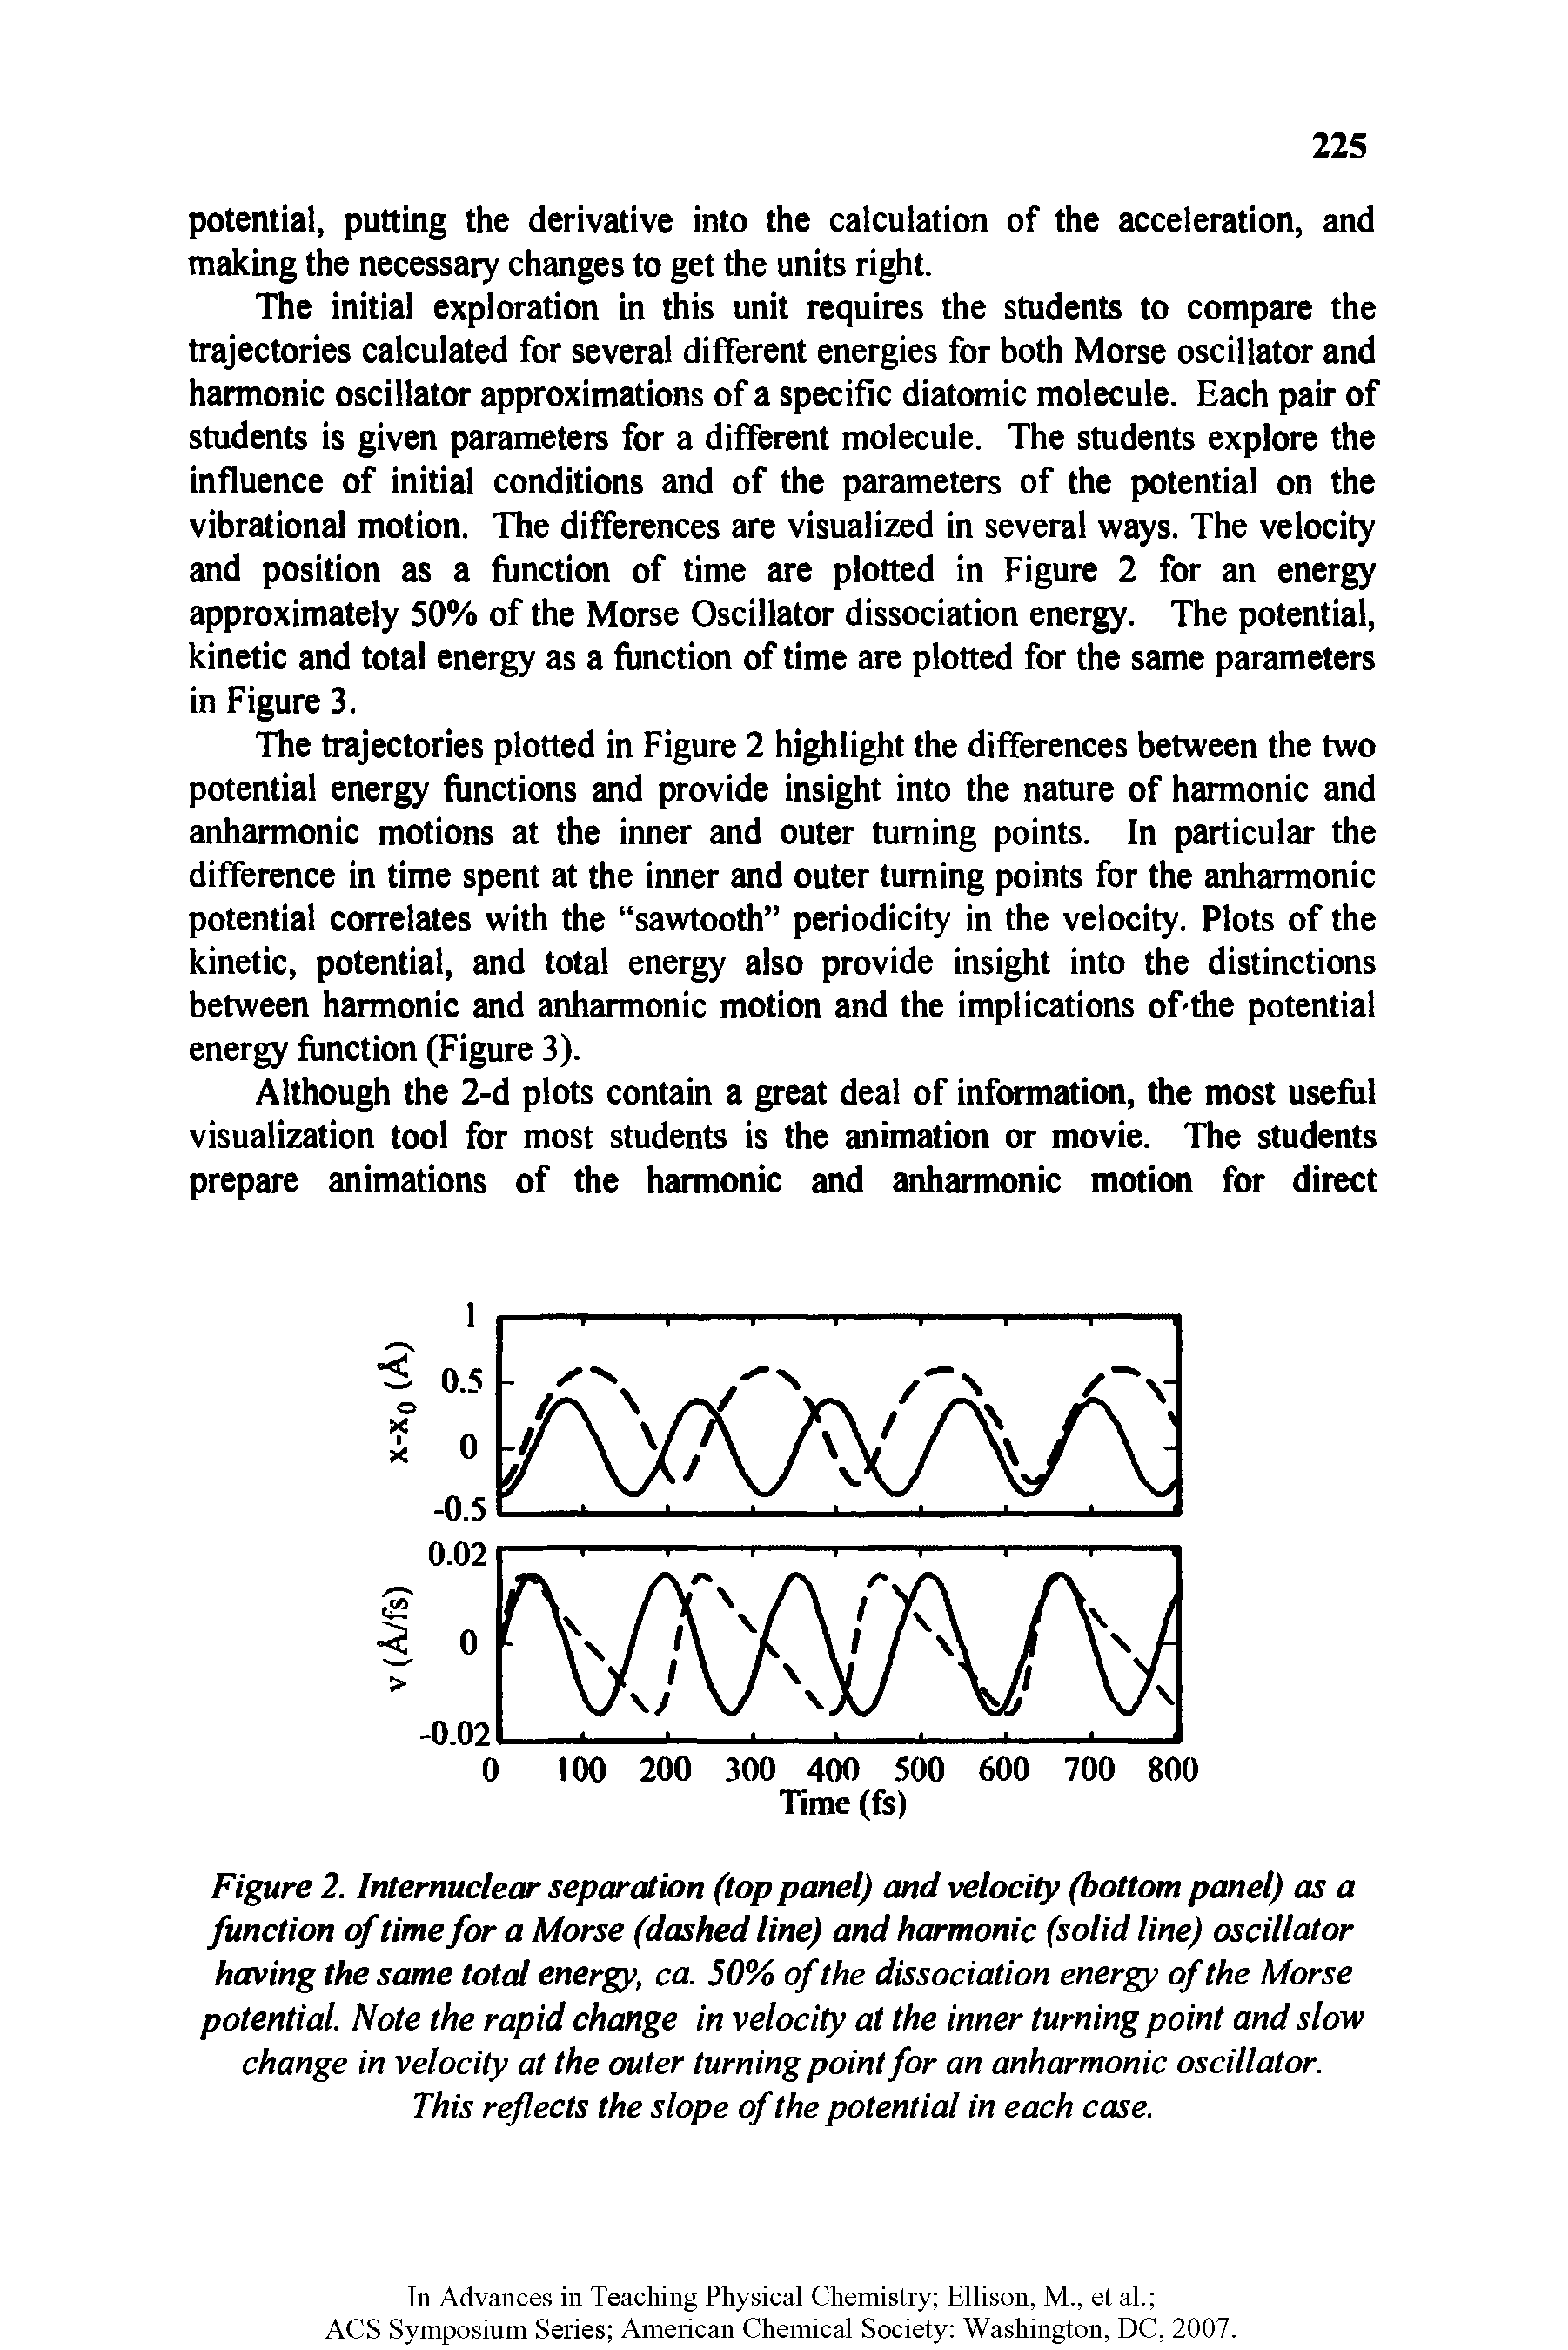 Figure 2. Internuclear separation (top panel) and velocity (bottom panel) as a function of time for a Morse (dashed line) and harmonic (solid line) oscillator having the same total energy, ca. 50% of the dissociation energy of the Morse potential. Note the rapid change in velocity at the inner turning point and slow change in velocity at the outer turning point for an anharmonic oscillator.